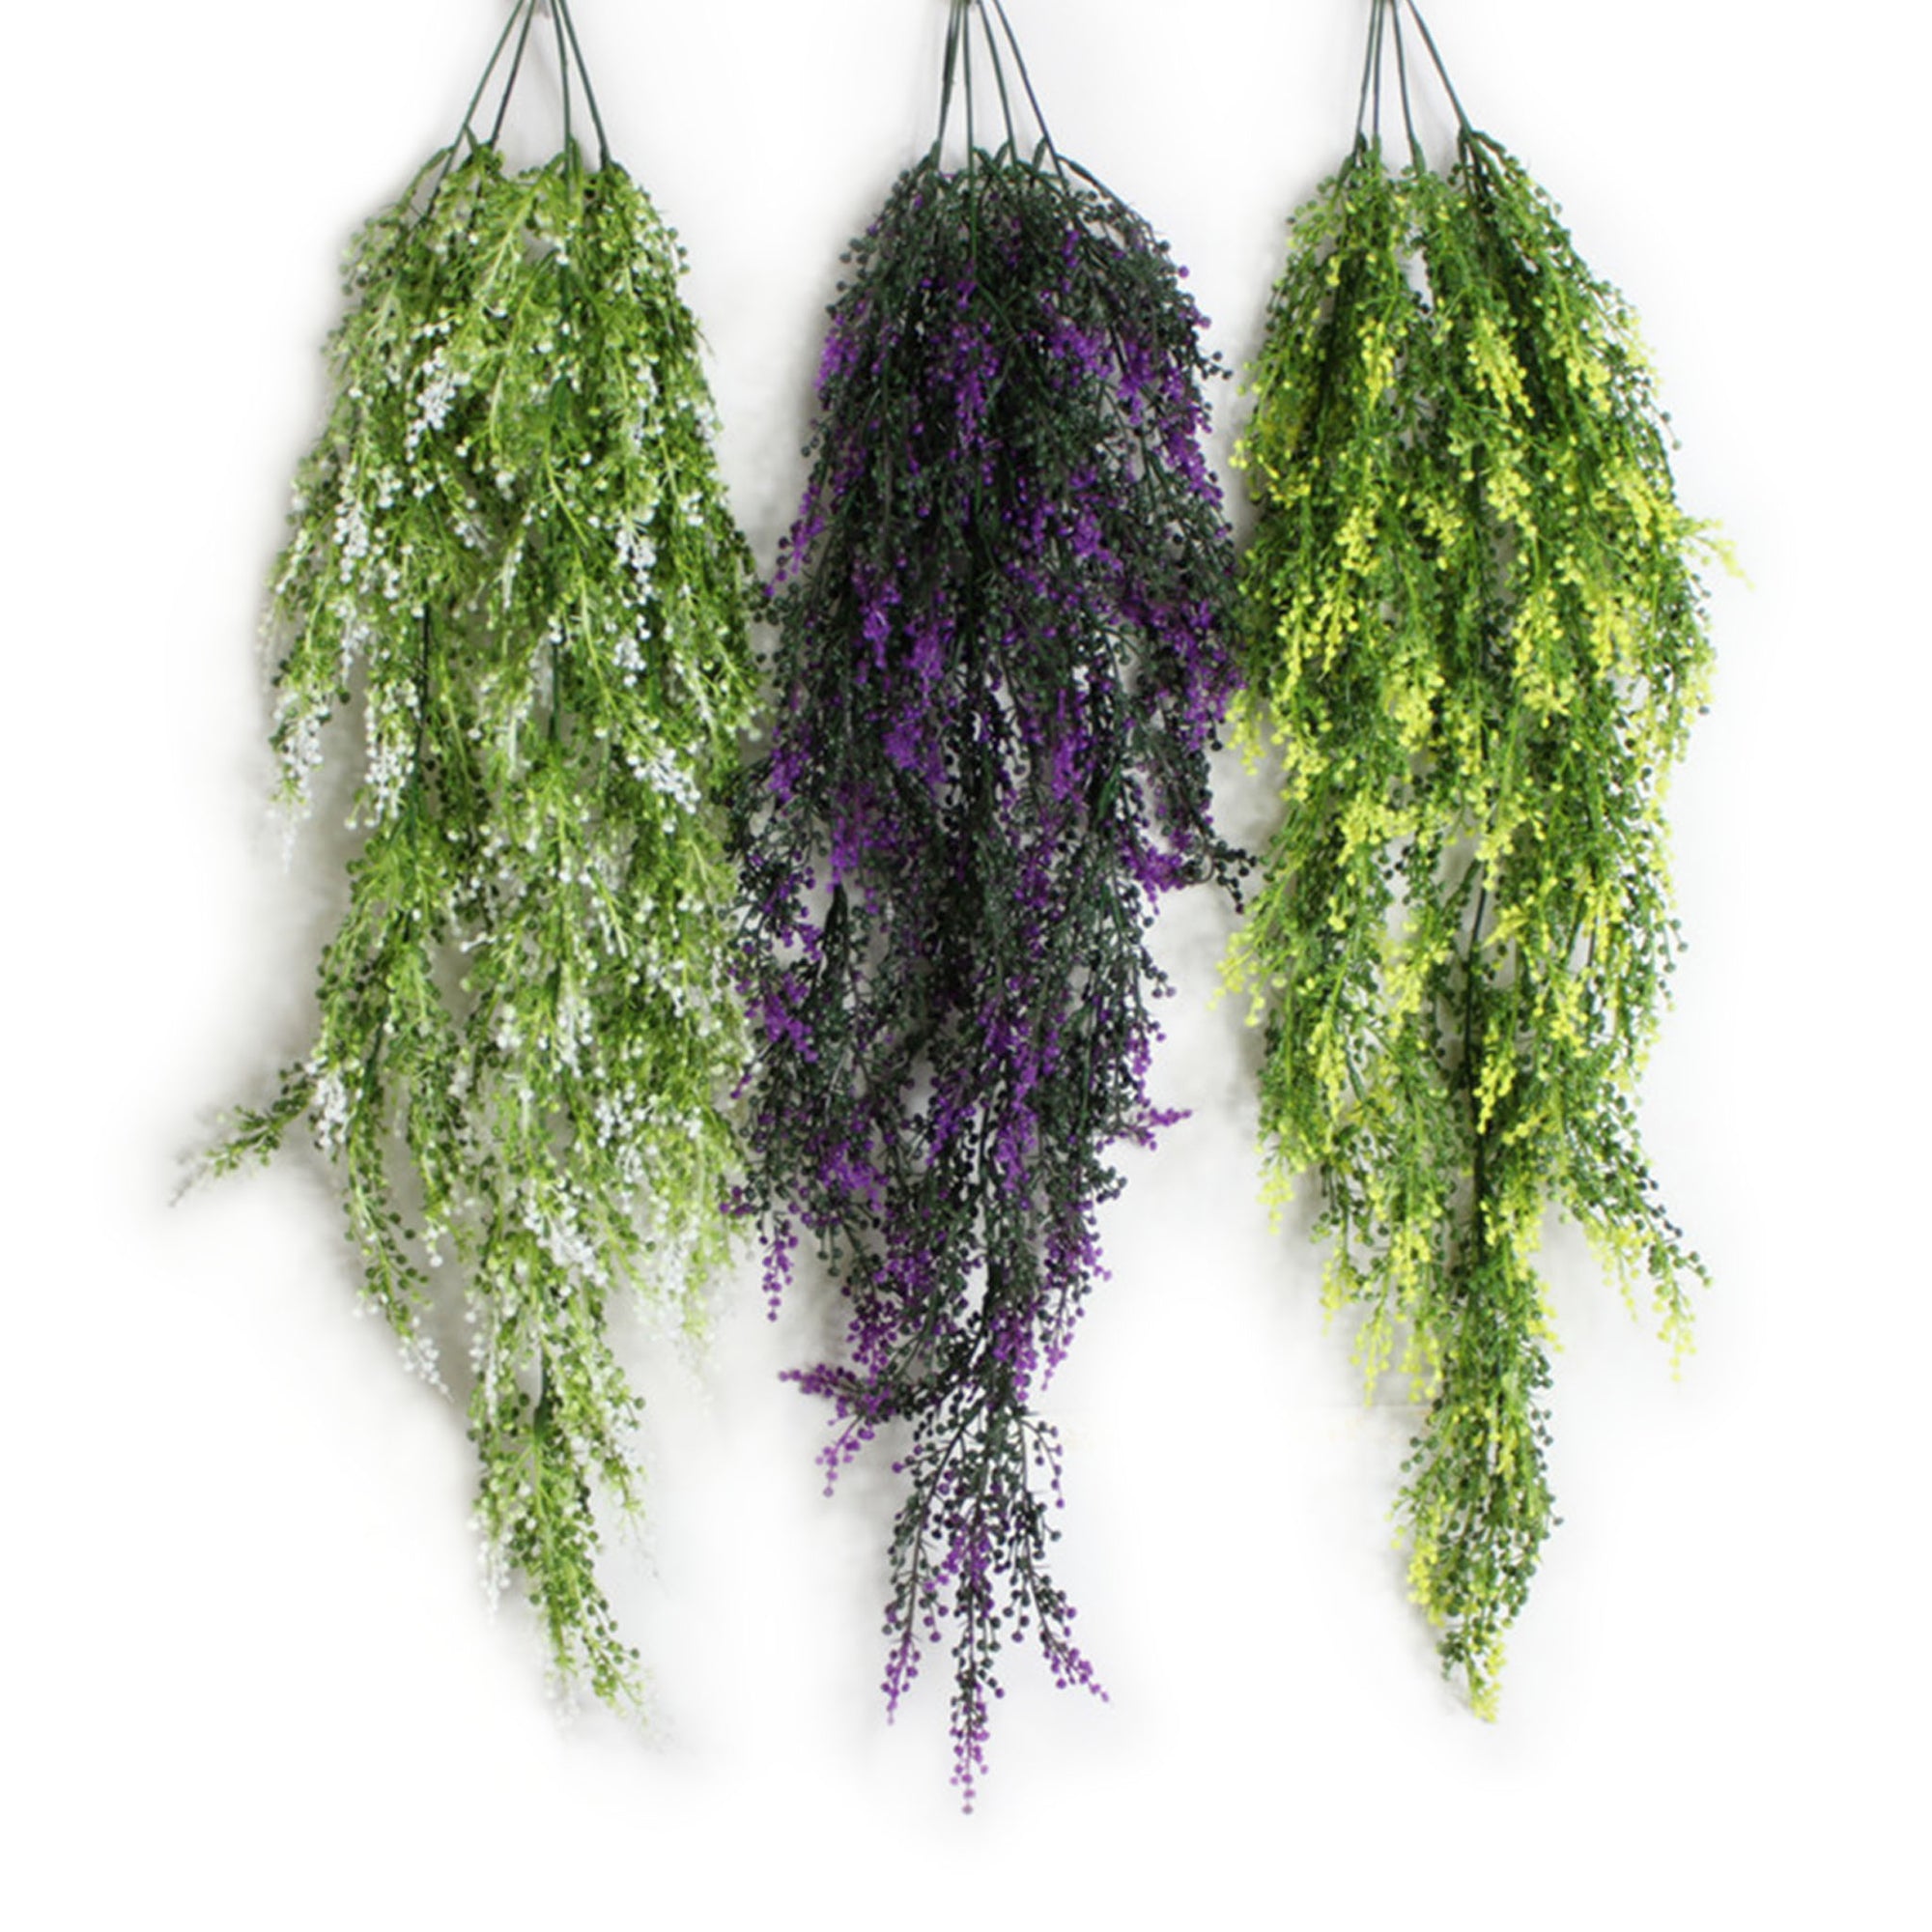 Artificial Hanging Plants for Wall Basket Planters